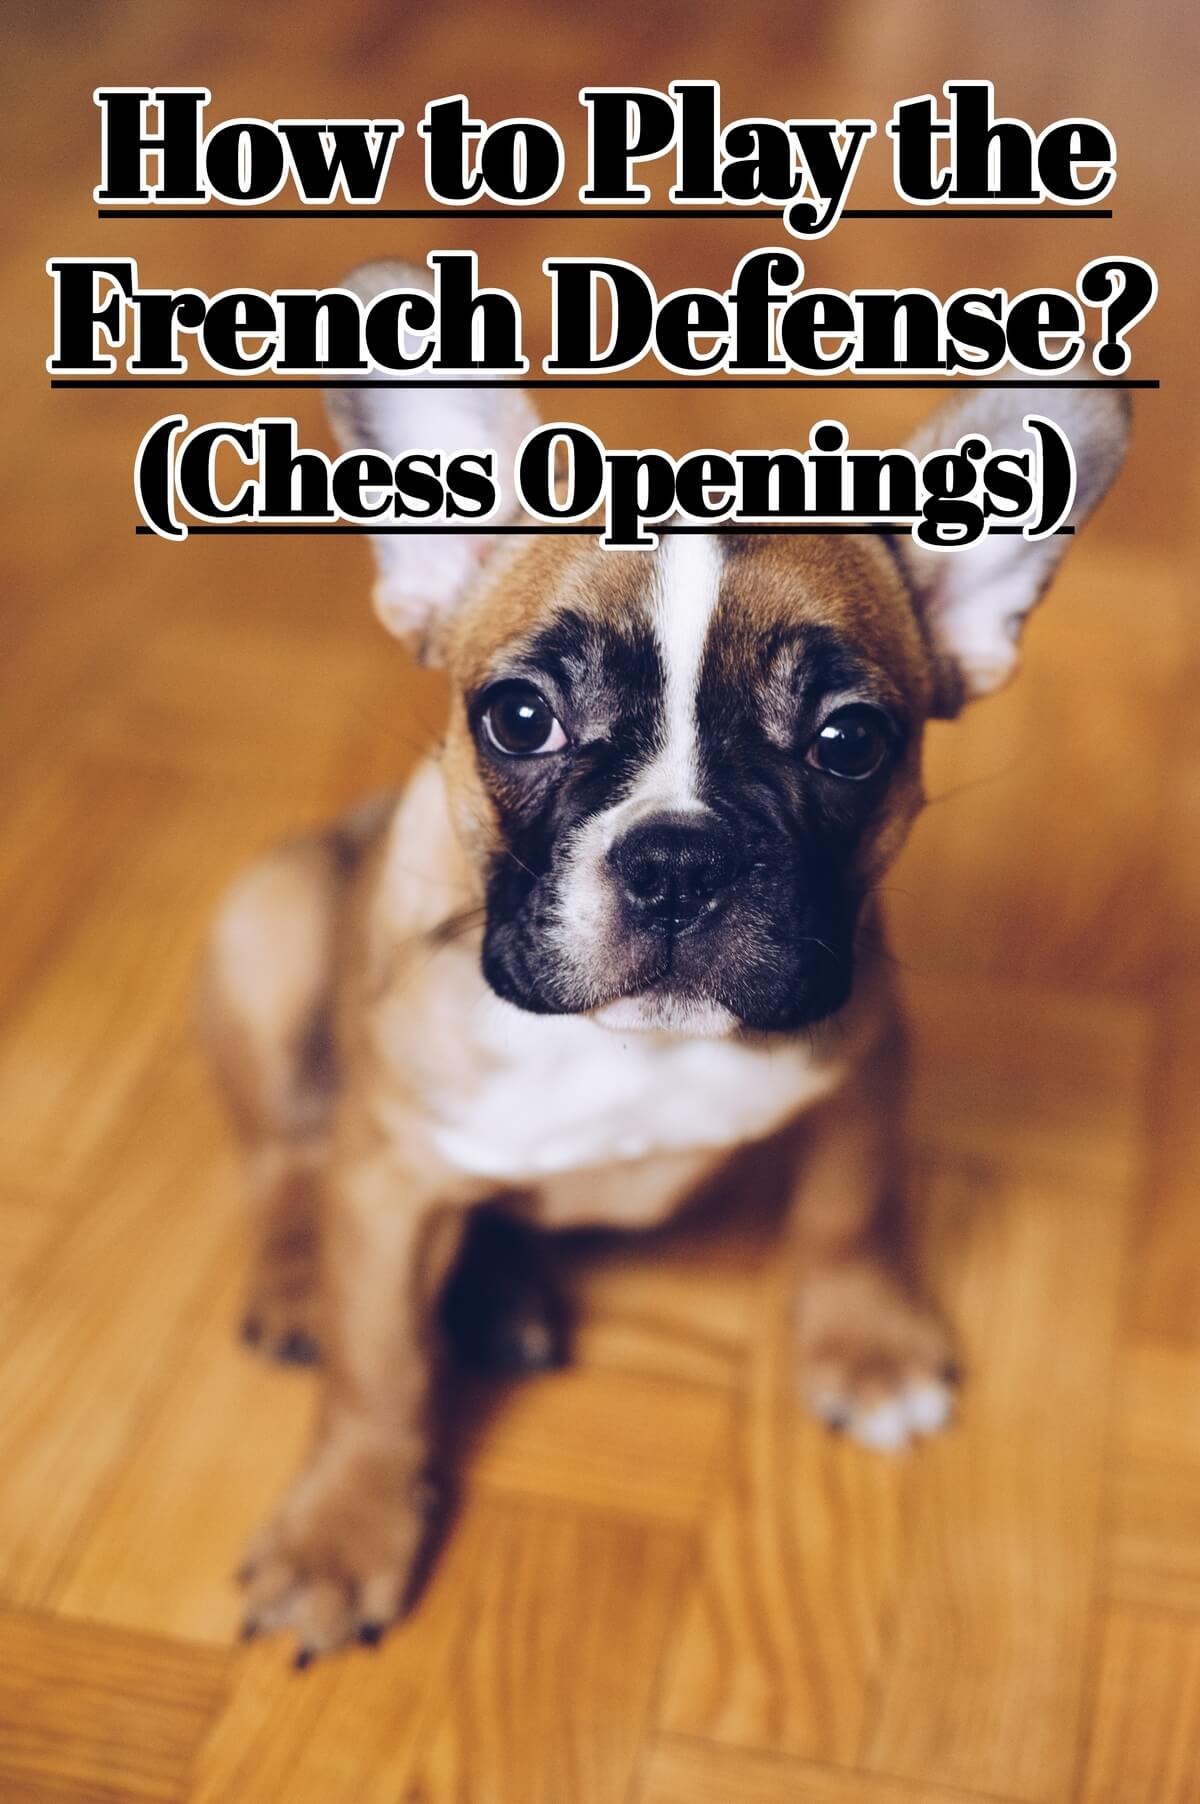 How to Play the French Defense - Chess Openings (ChessLoversOnly)